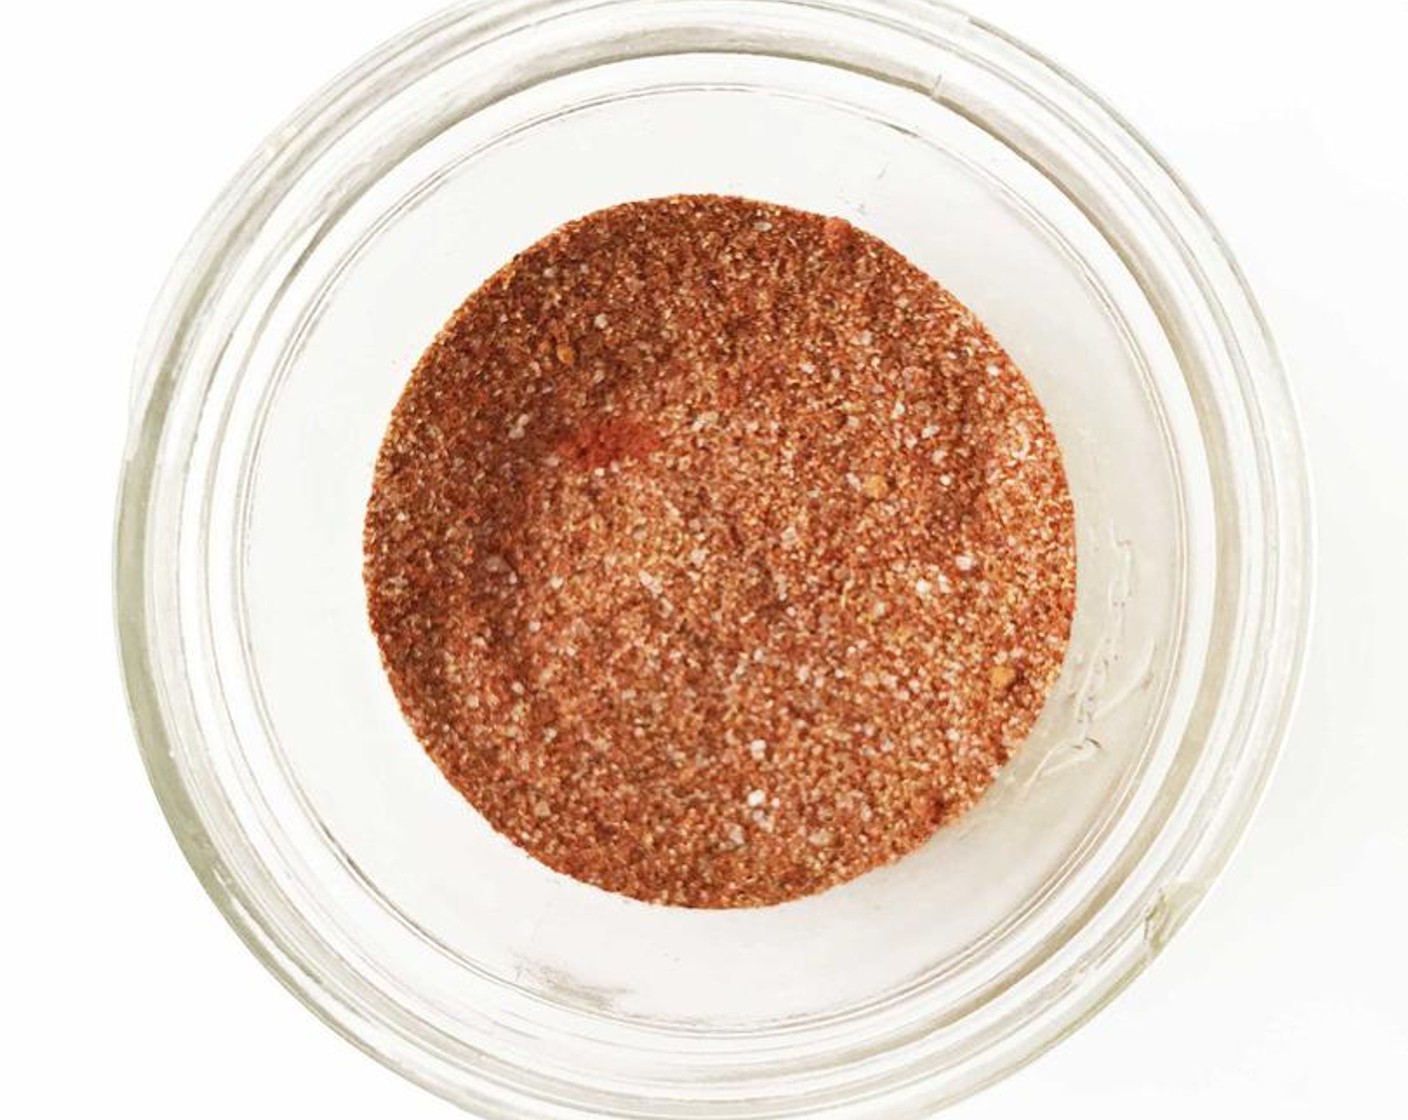 step 2 In a small bowl, mix together the Salt (1/2 Tbsp), Smoked Paprika (1/2 Tbsp), Chili Powder (3/4 tsp), Ground Cumin (3/4 tsp), and Cayenne Pepper (1/8 tsp).